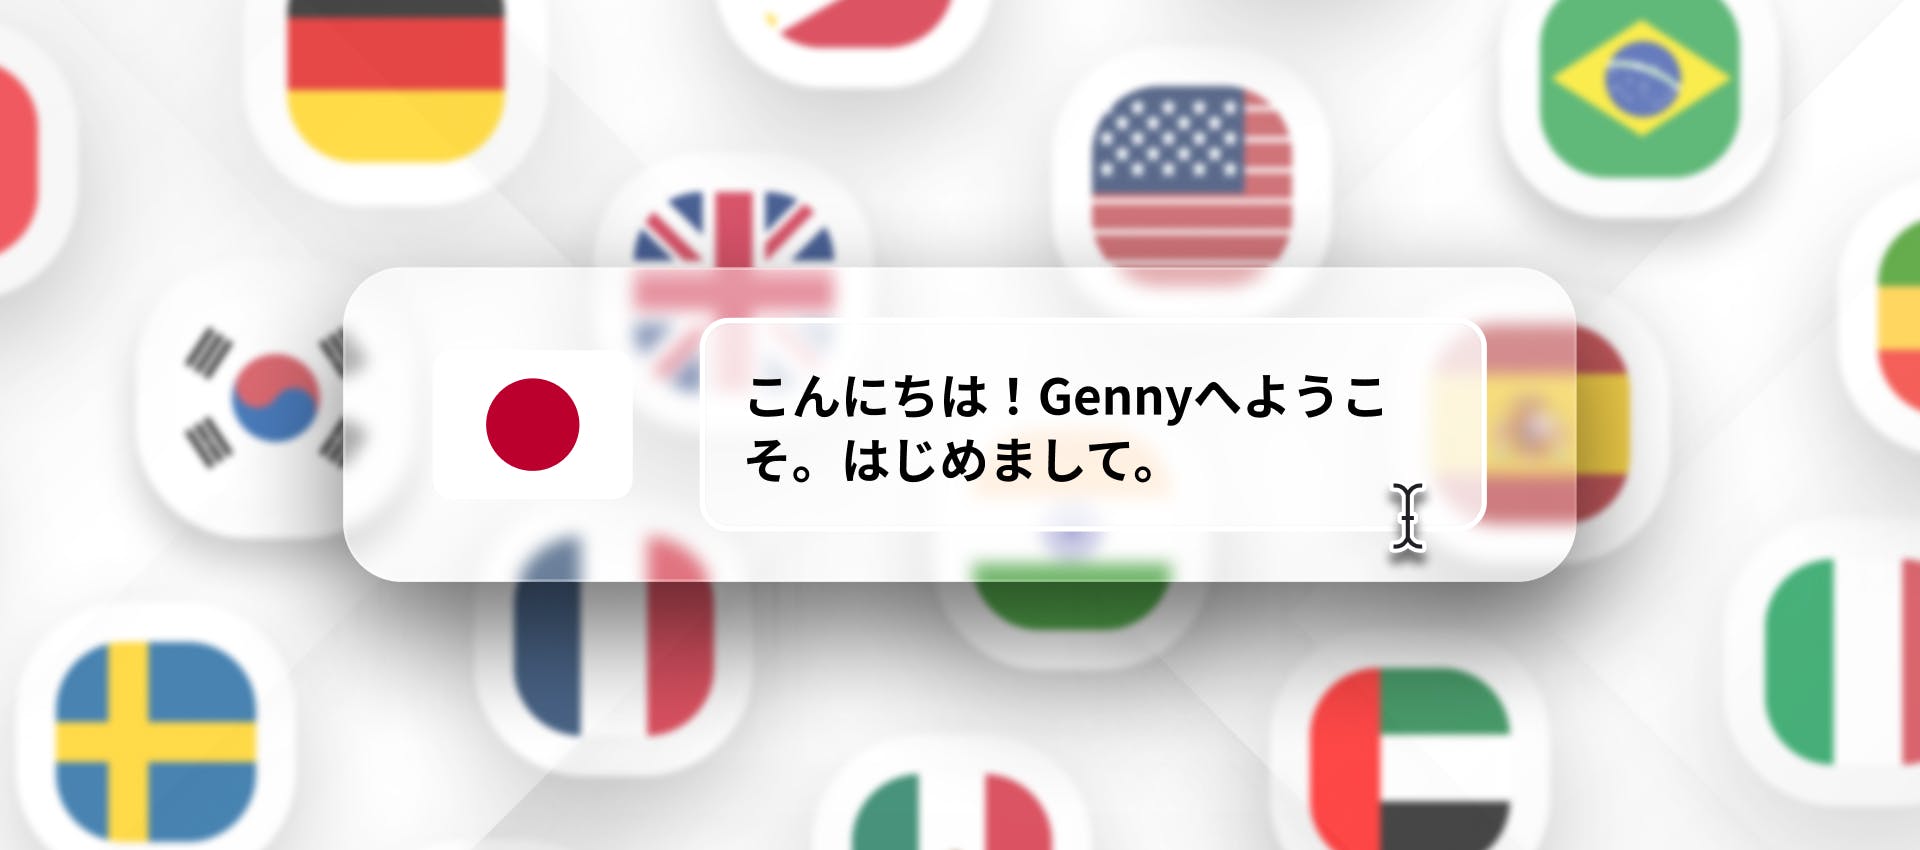 Japanese phrase for TTS with background full of flags